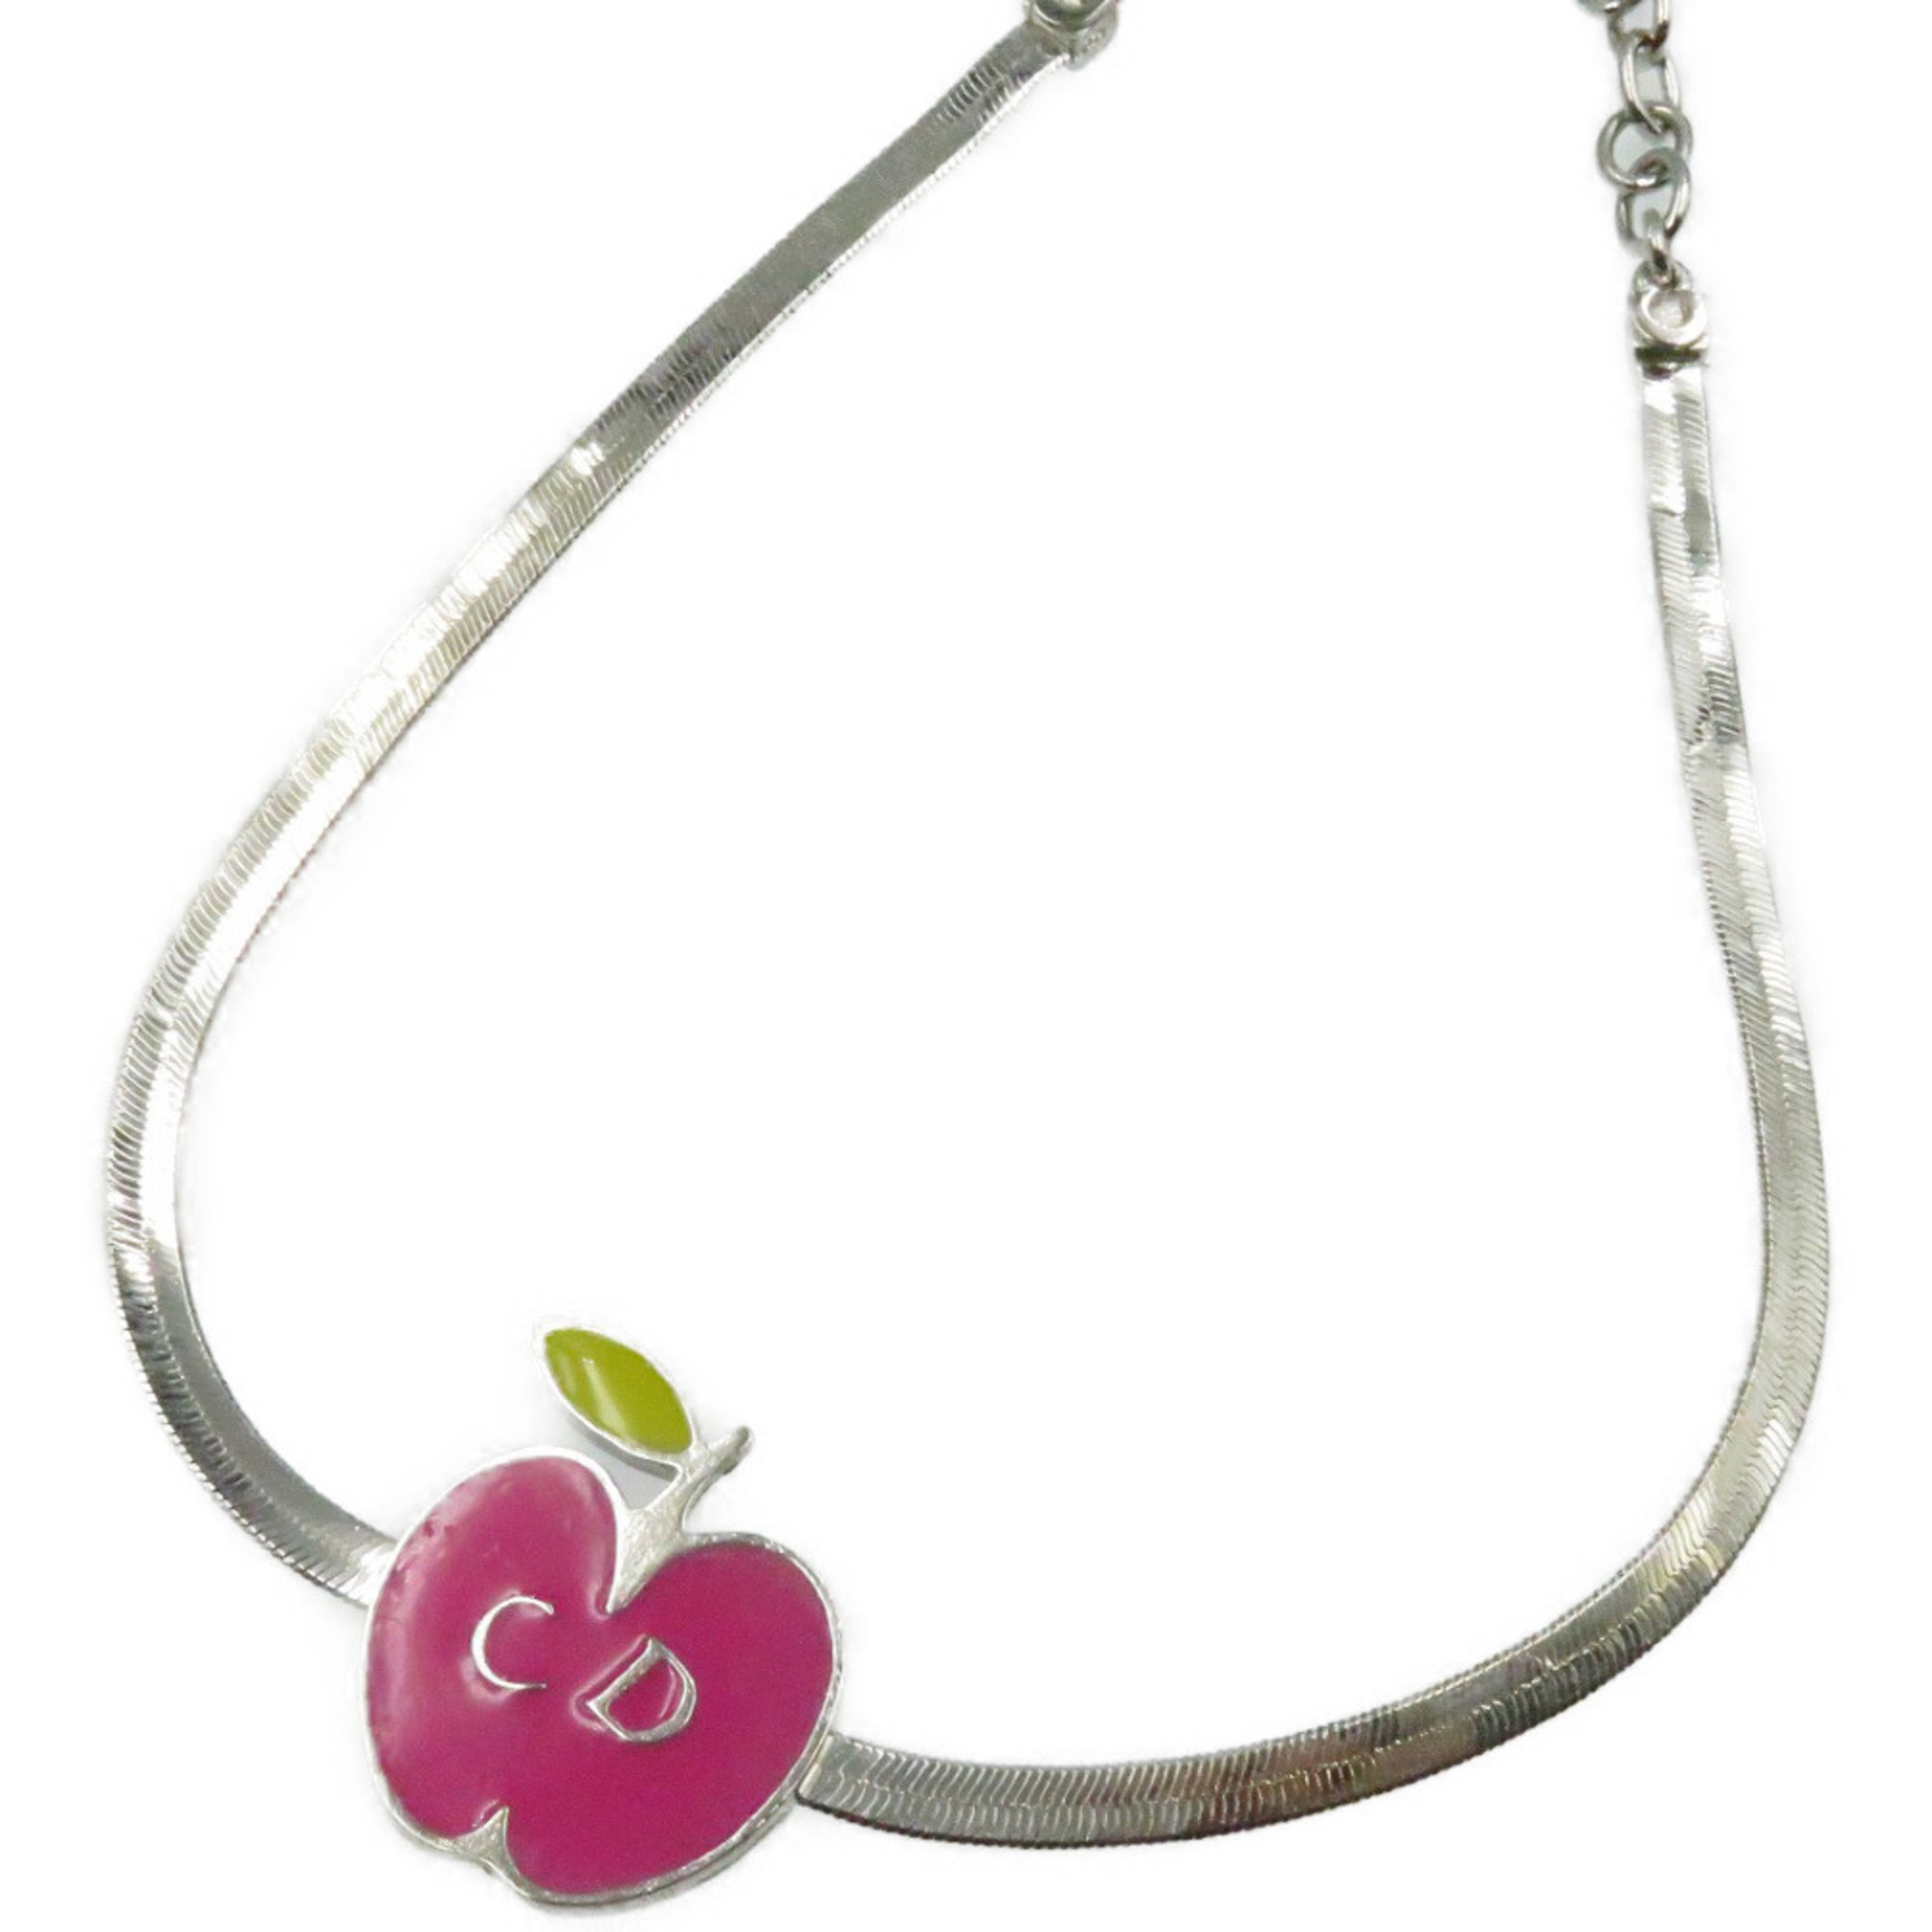 Christian Dior Choker Necklace Apple Pink Silver Metal 0157